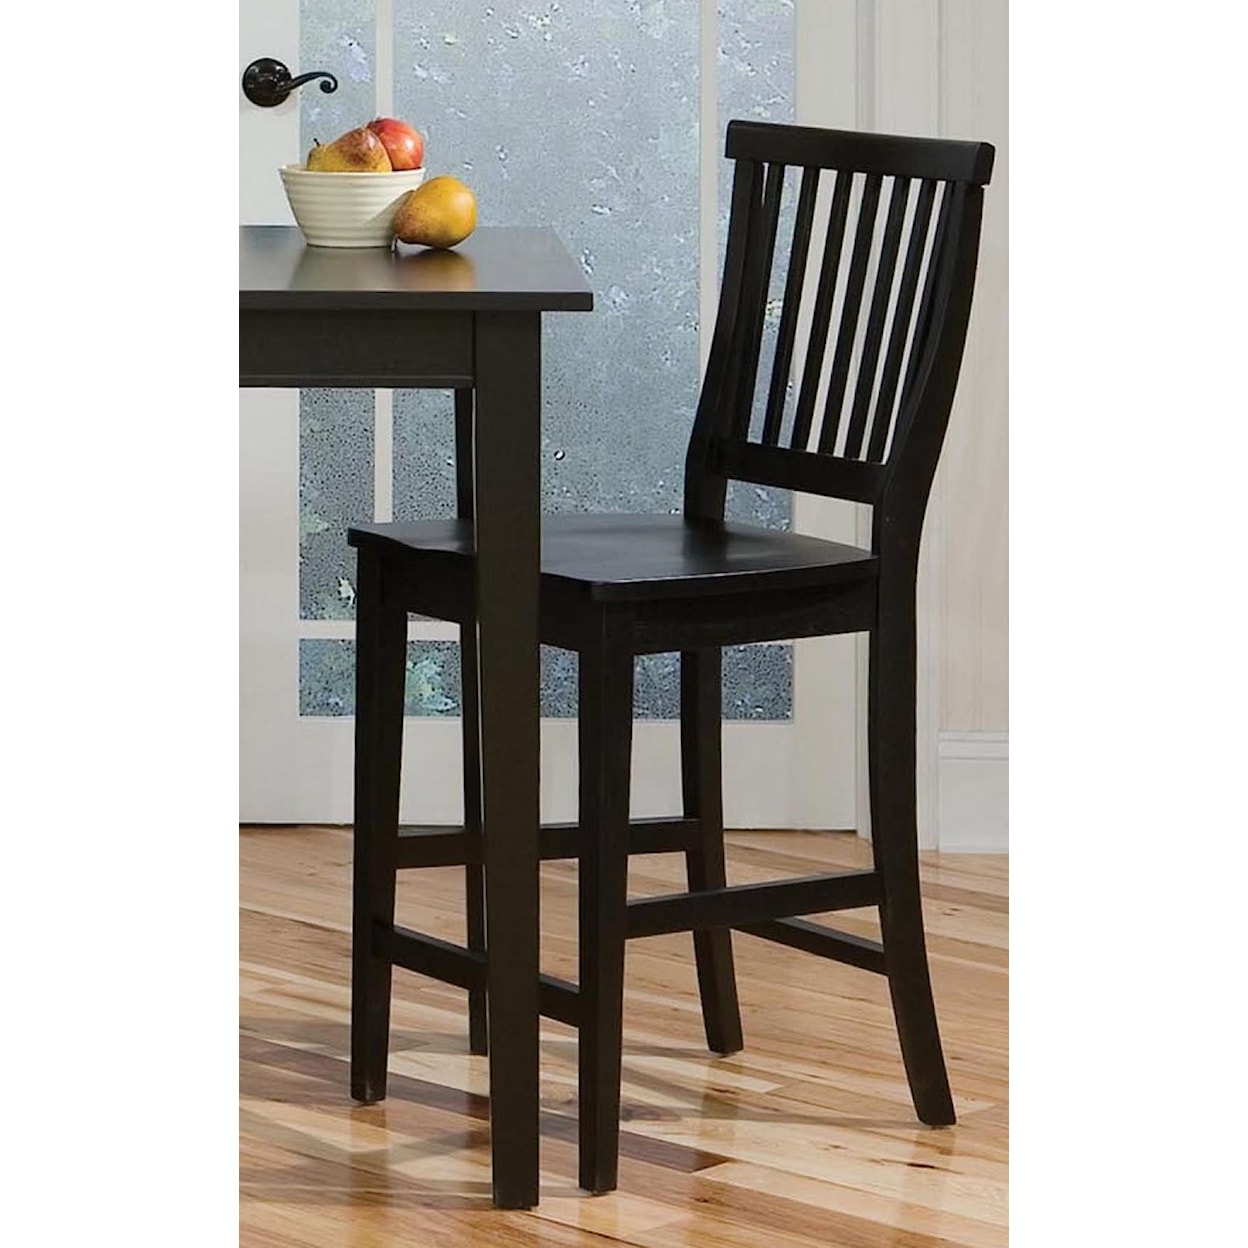 homestyles Arts and Crafts Bistro Stool